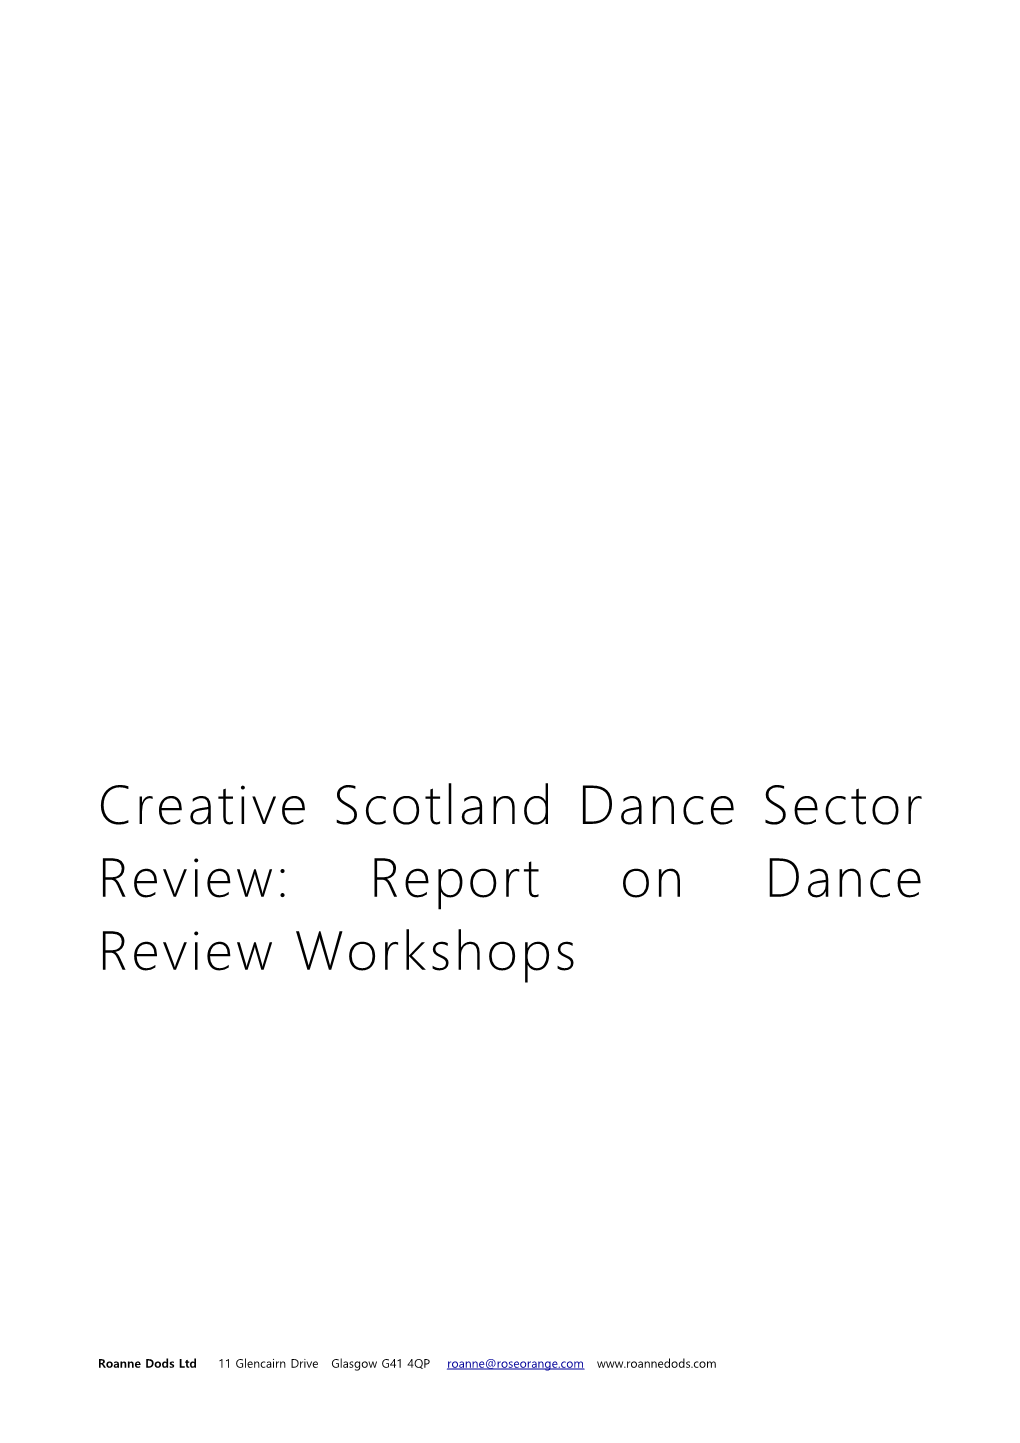 Creative Scotland Dance Sector Review: Report on Dance Review Workshops